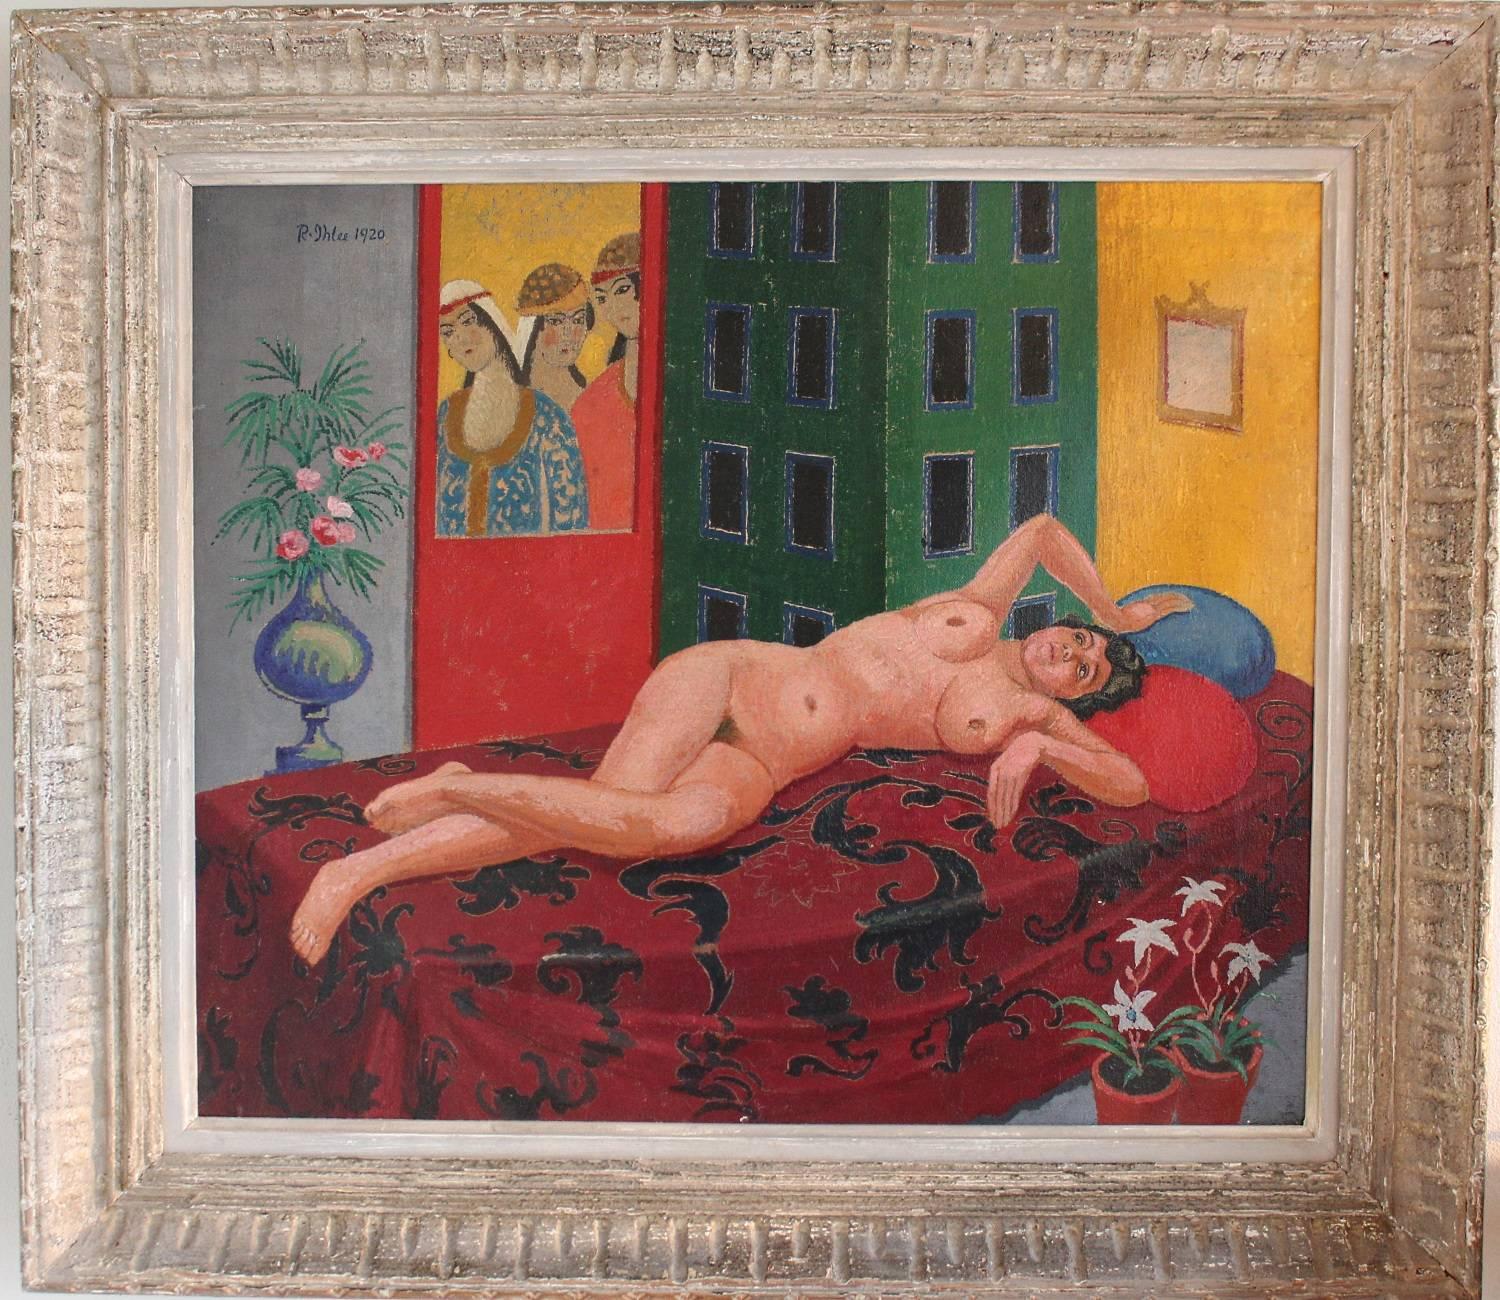 'Reclining Nude', an oil on canvas painting by Rudolph Ihlee (1883-1968). Ihlee was a painter and draughtsman, who was born in London. He studied at the Slade School of Fine Arts in 1906-1910 where he was awarded a number of prizes for his